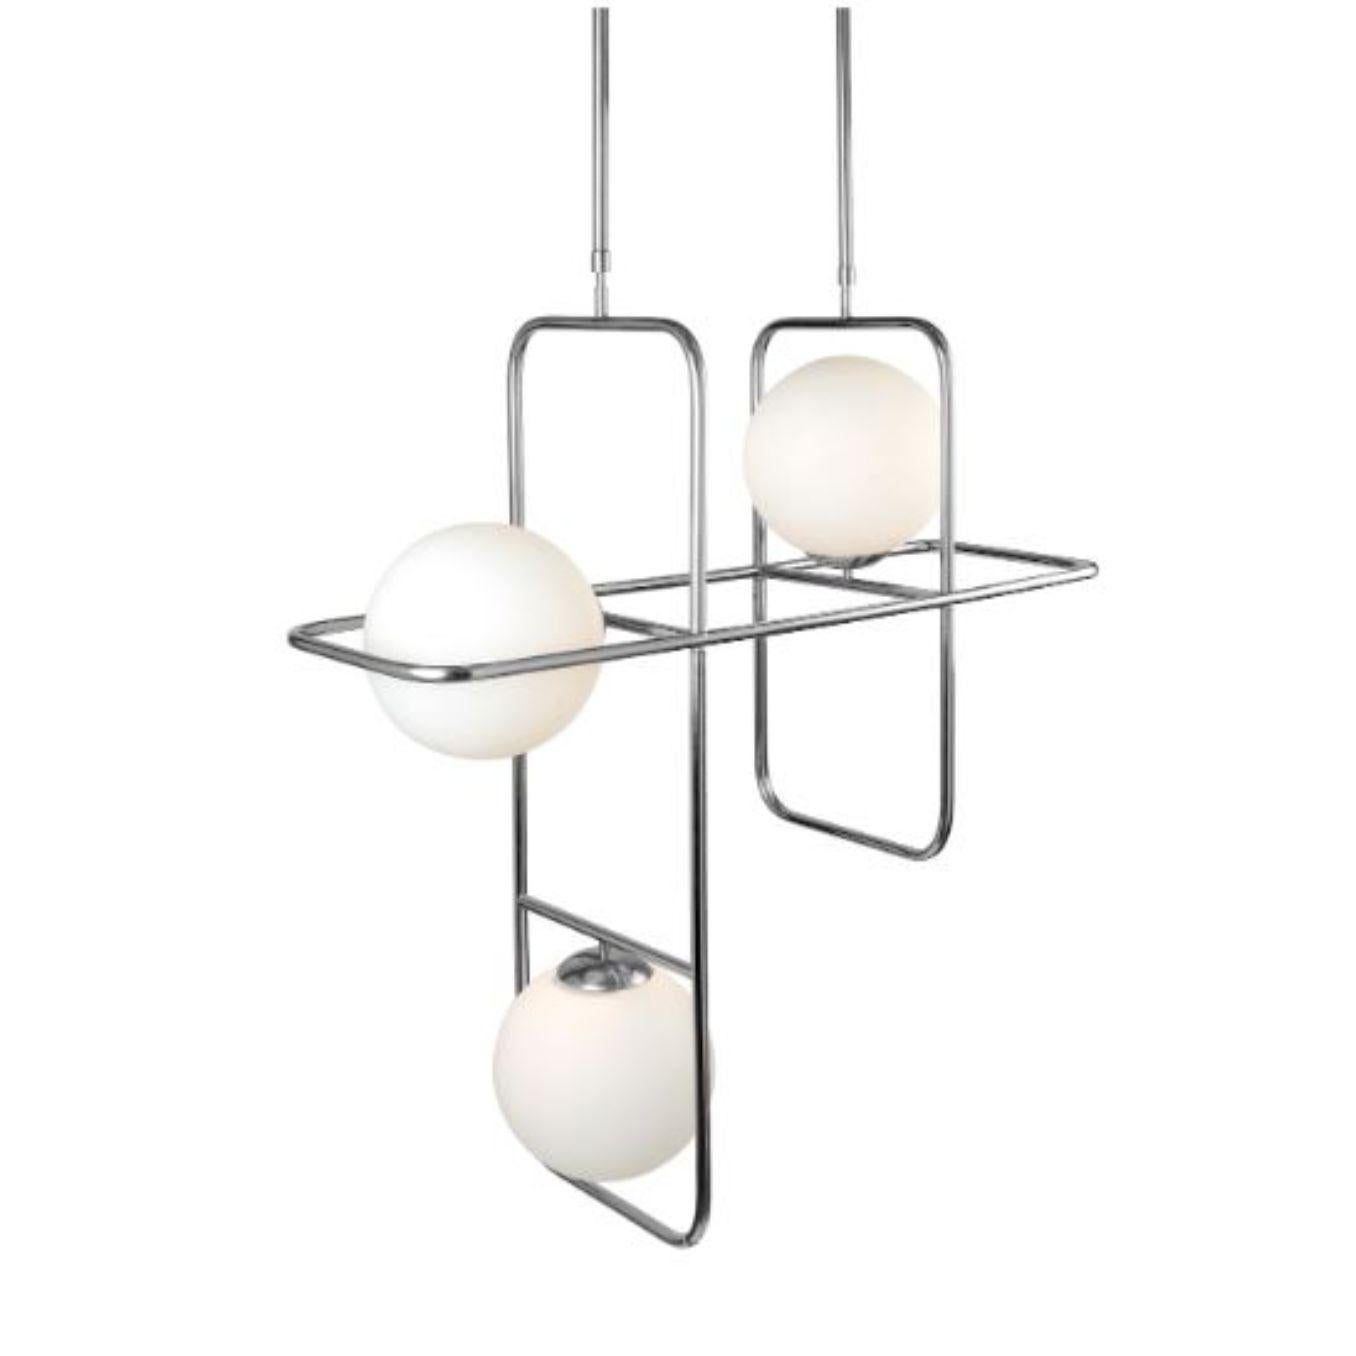 Nickel link I suspension lamp by Dooq
Dimensions: W 100 x D 33 x H 100 cm
Materials: lacquered metal, polished or brushed metal, nickel.
Also available in different colours and materials.

Information:
230V/50Hz
3 x max. G9
5W LED

120V/60Hz
3 x